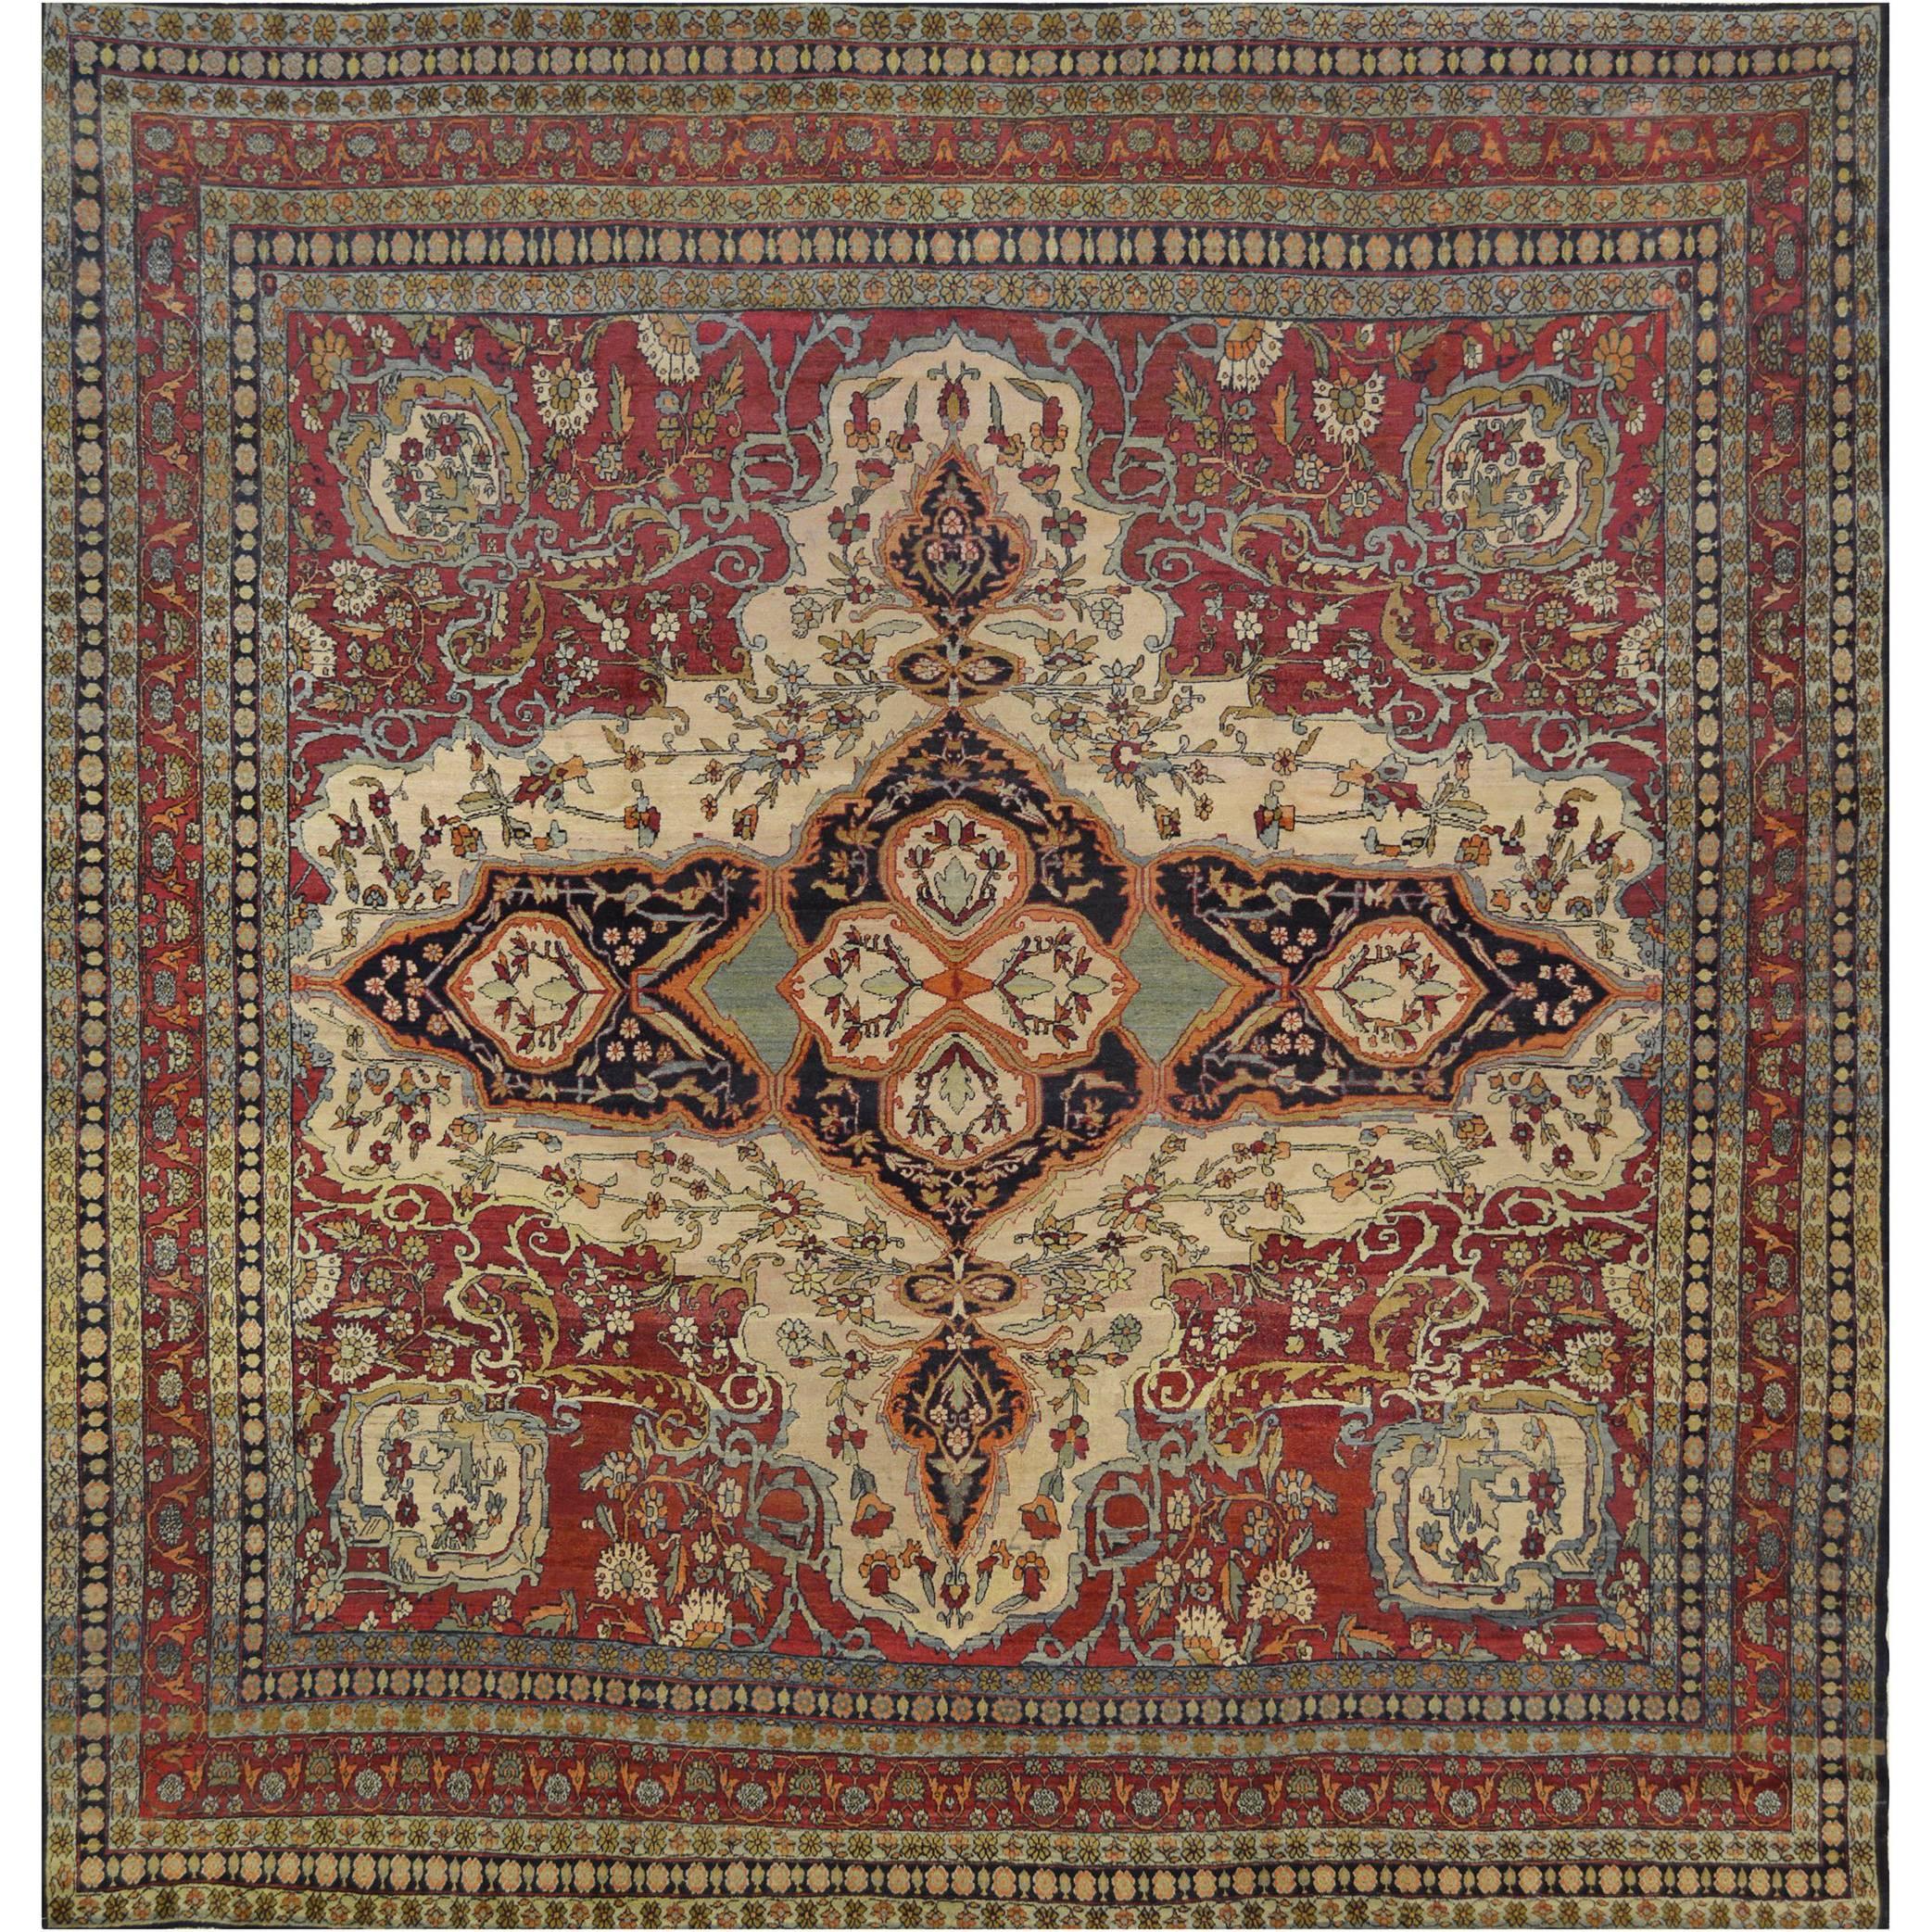 Late 19th Century Isfahan Rug from Central Persia